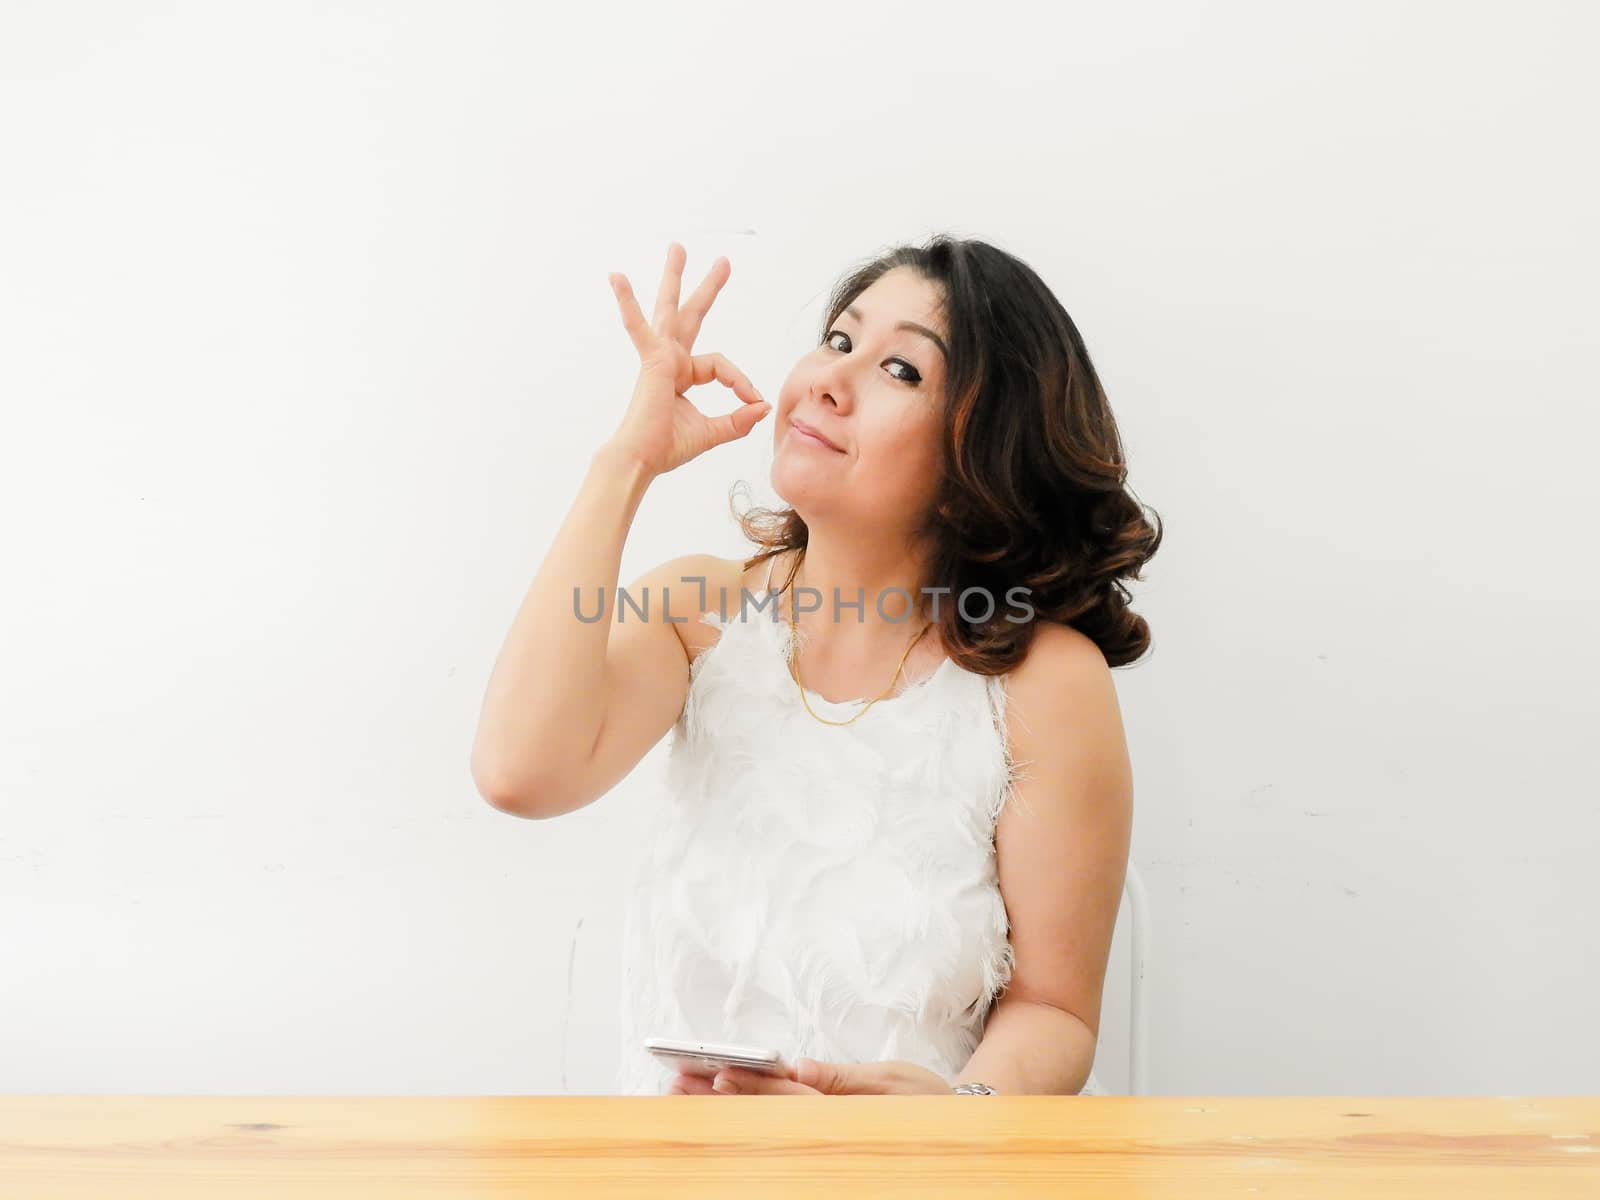 Beautiful woman showing OK hand sign smiling happy against white background.
